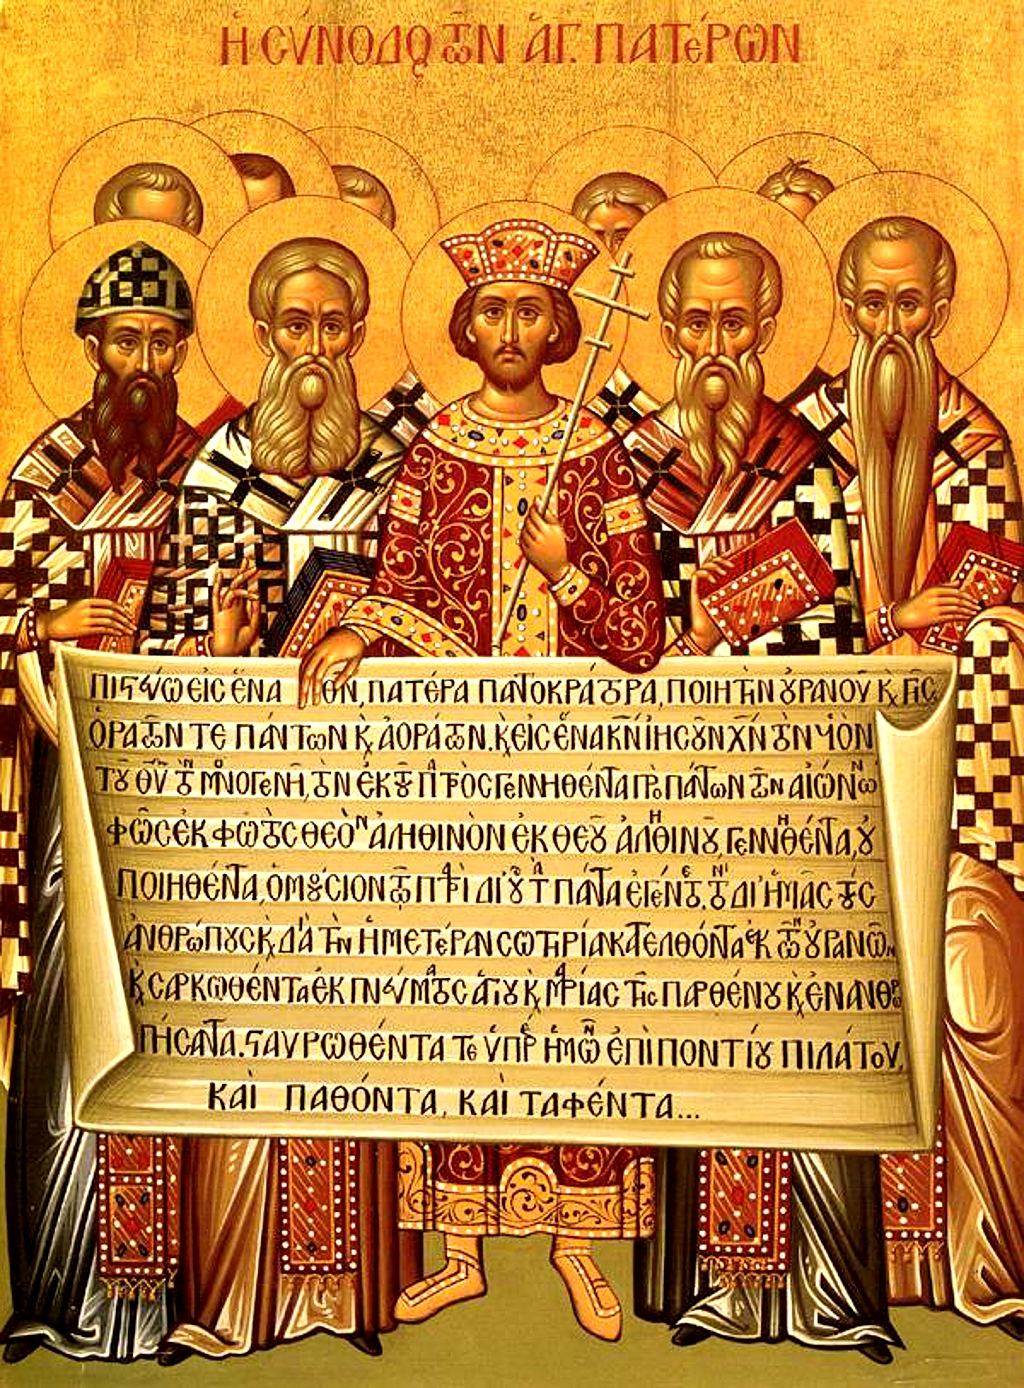 An icon depicts the Council of Nicaea, out of which came the Nicene Creed.